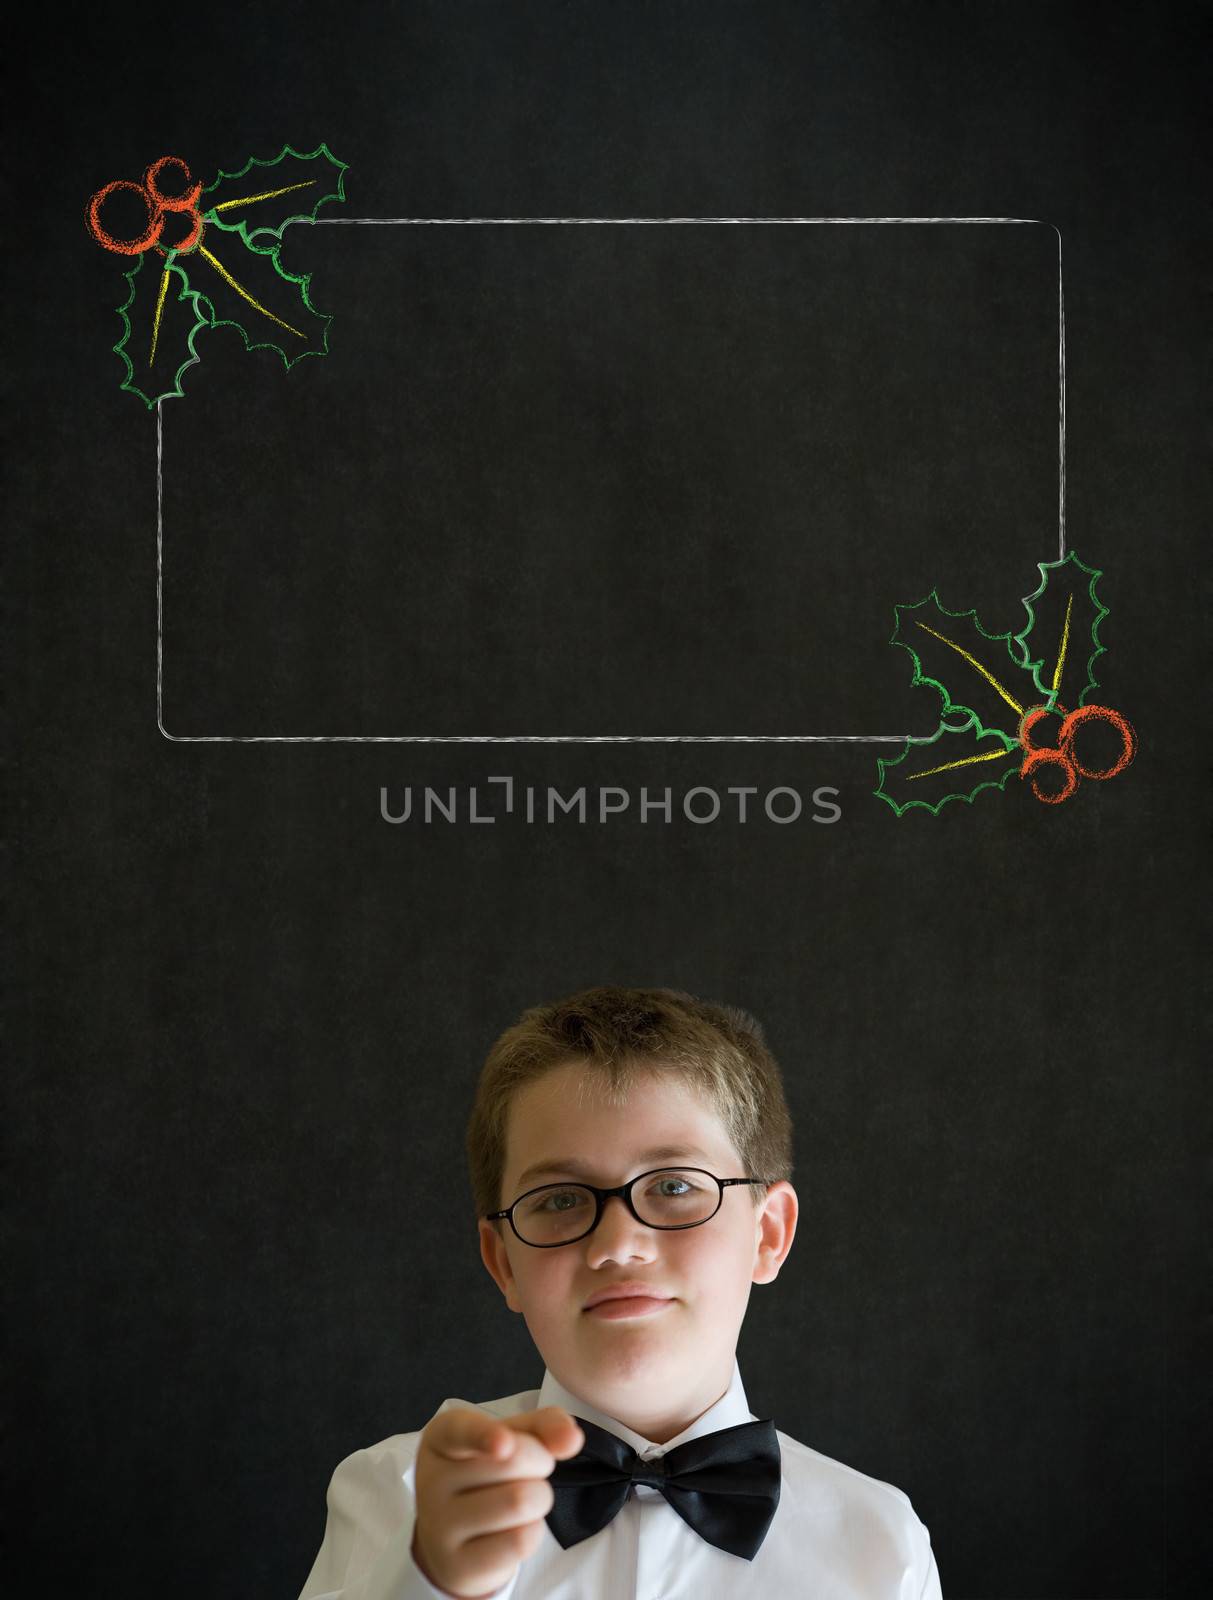 Education needs you thinking boy dressed up as business man with Christmas holly to do checklist on blackboard background